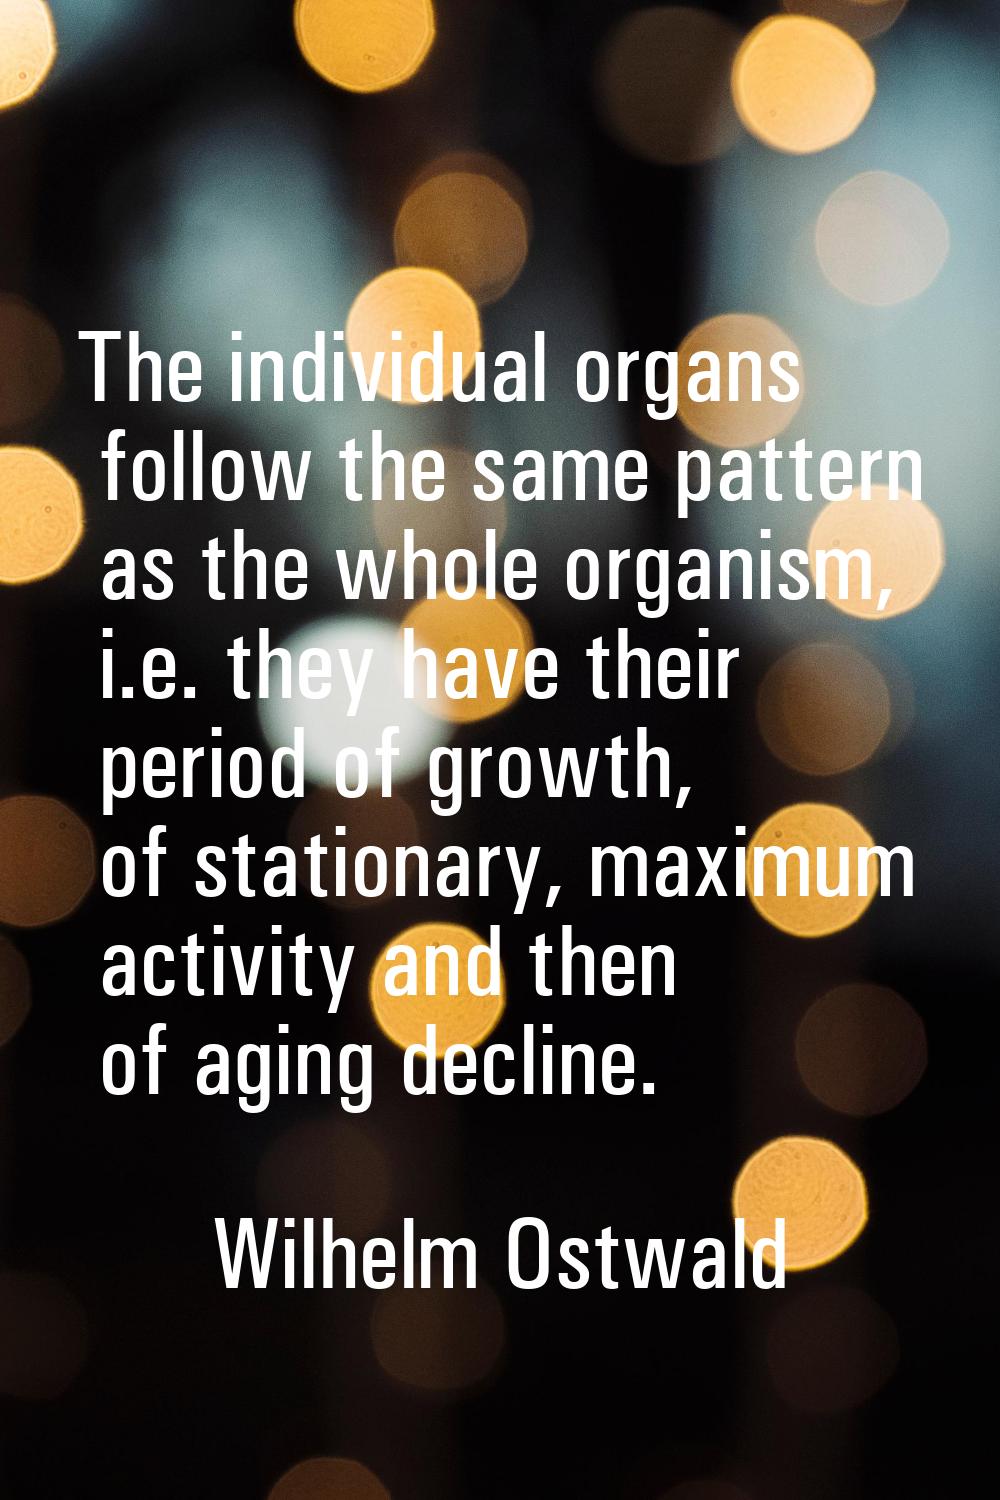 The individual organs follow the same pattern as the whole organism, i.e. they have their period of